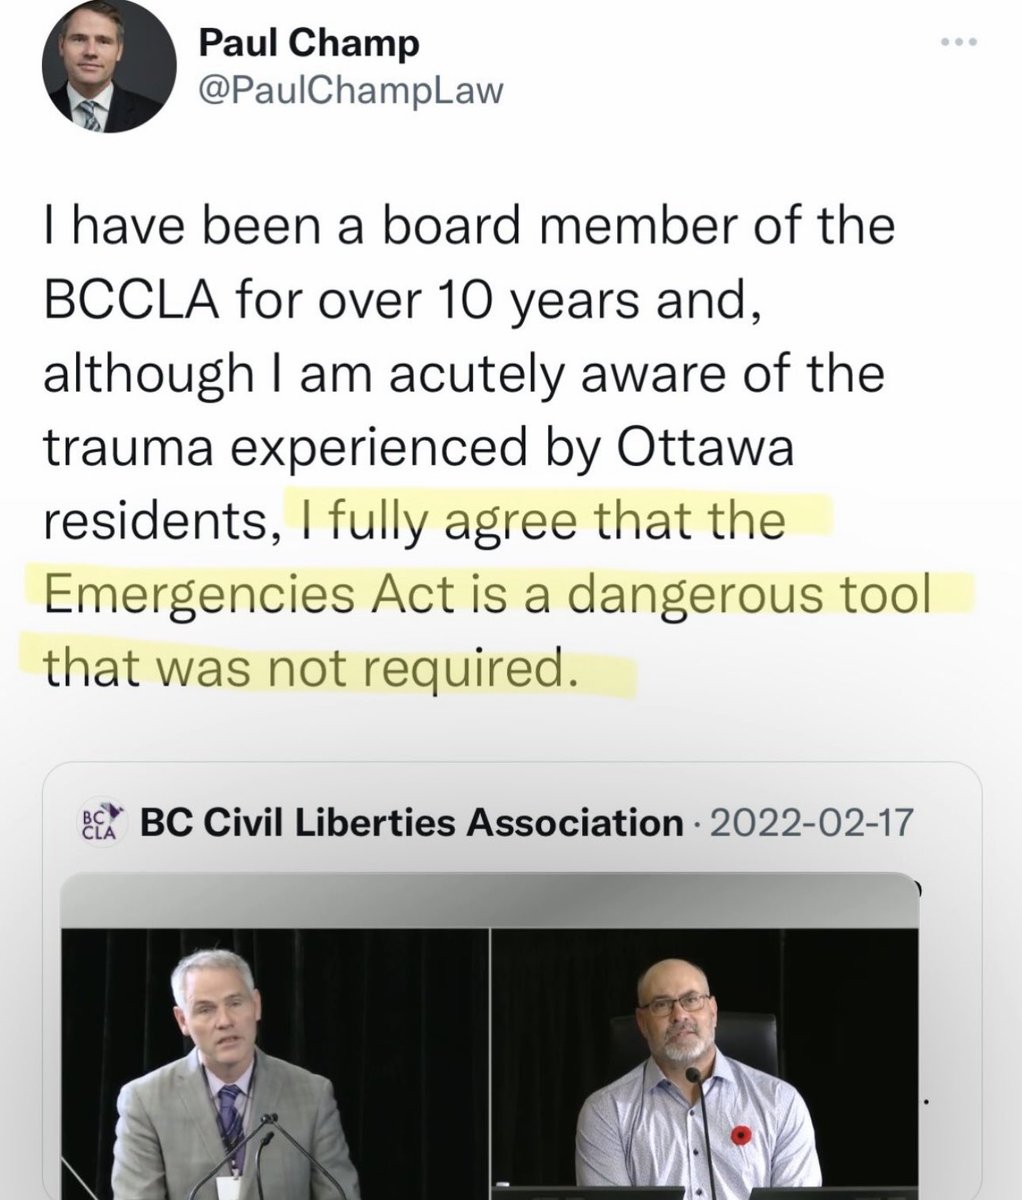 Even the lawyer heading up the bogus & ridiculous $300 million dollar lawsuit against the Freedom Convoy knows the Emergencies Act violated Canadian’s Charter Rights. 😉
#EmergenciesAct #CharterRights